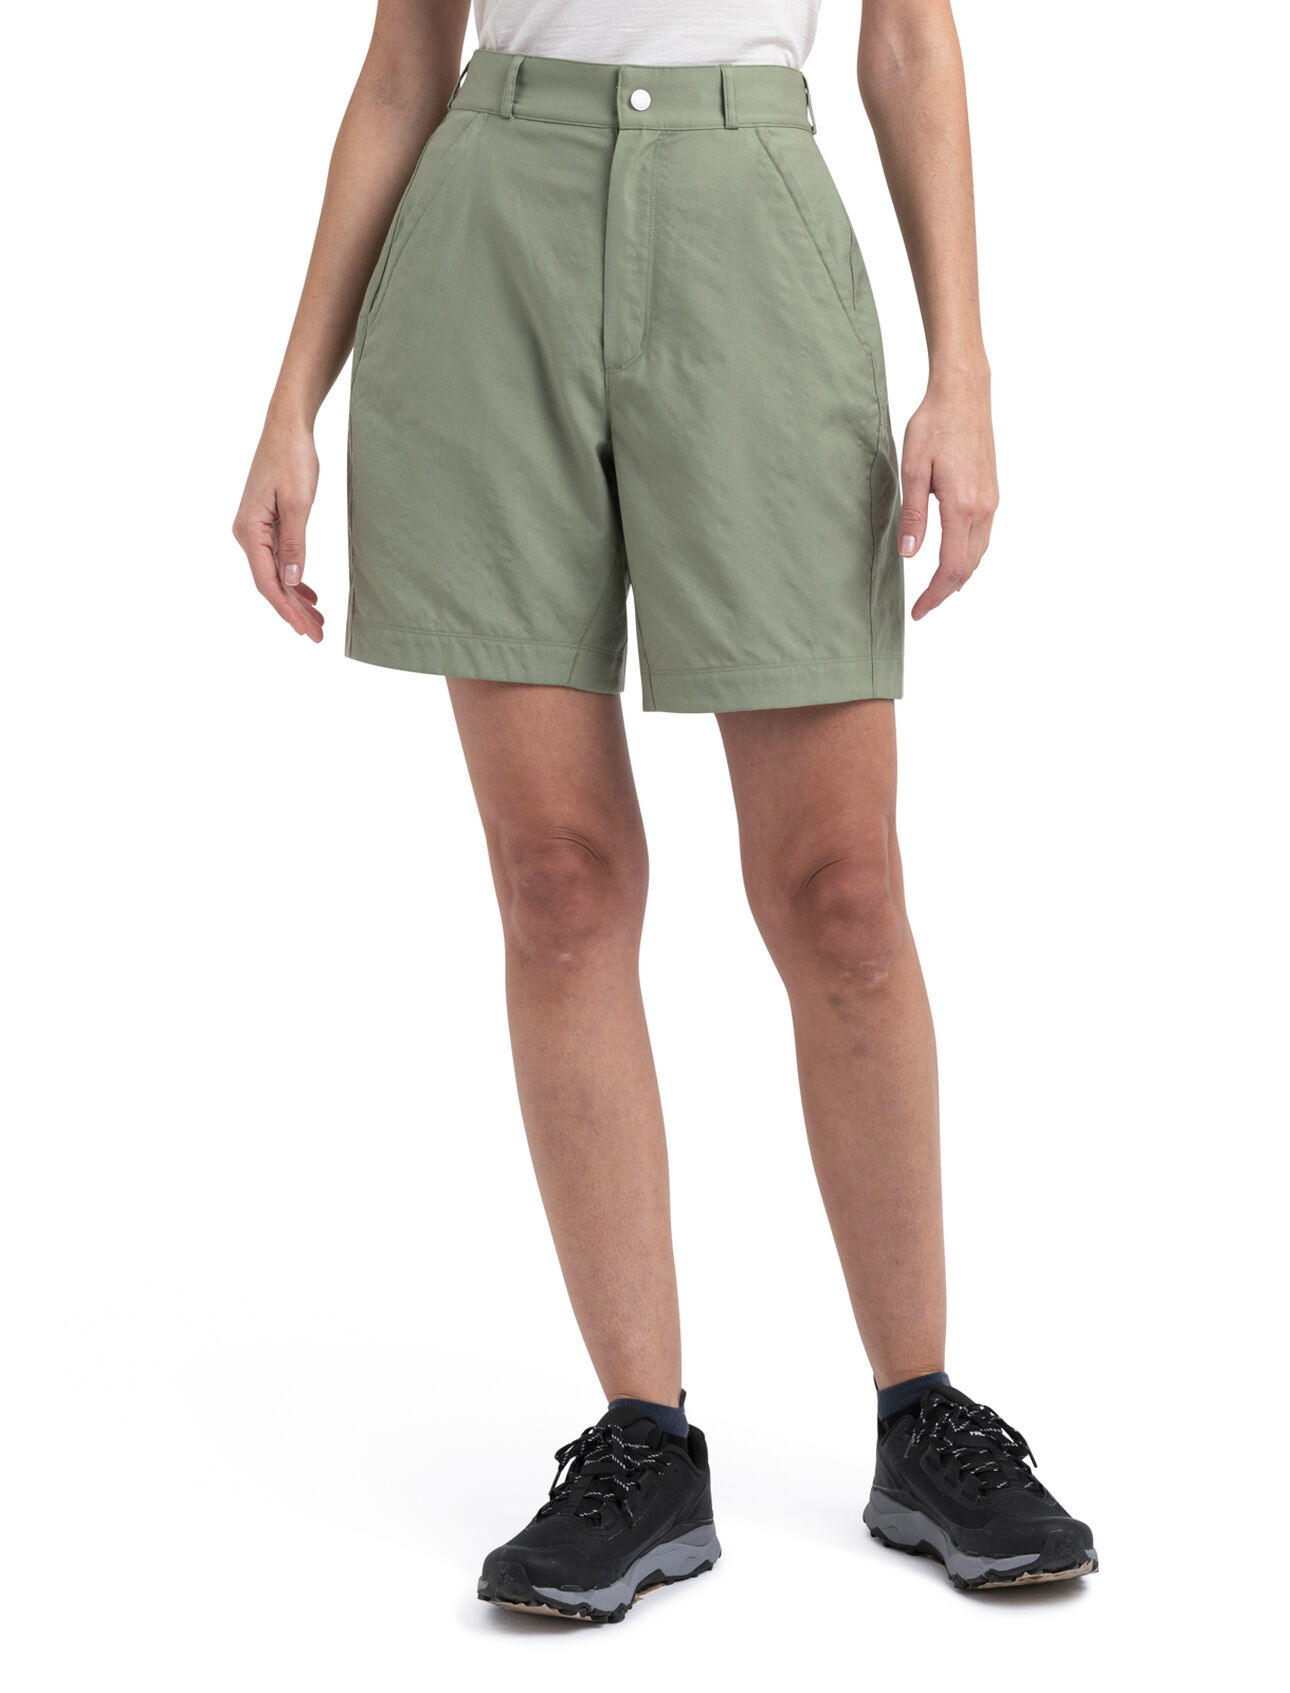 Womens Merino Hike 8'' Shorts A durable and dependable mountain short made from a unique blend of merino wool and organically grown cotton, the Hike Shorts are perfect for mountain adventures of all kinds.